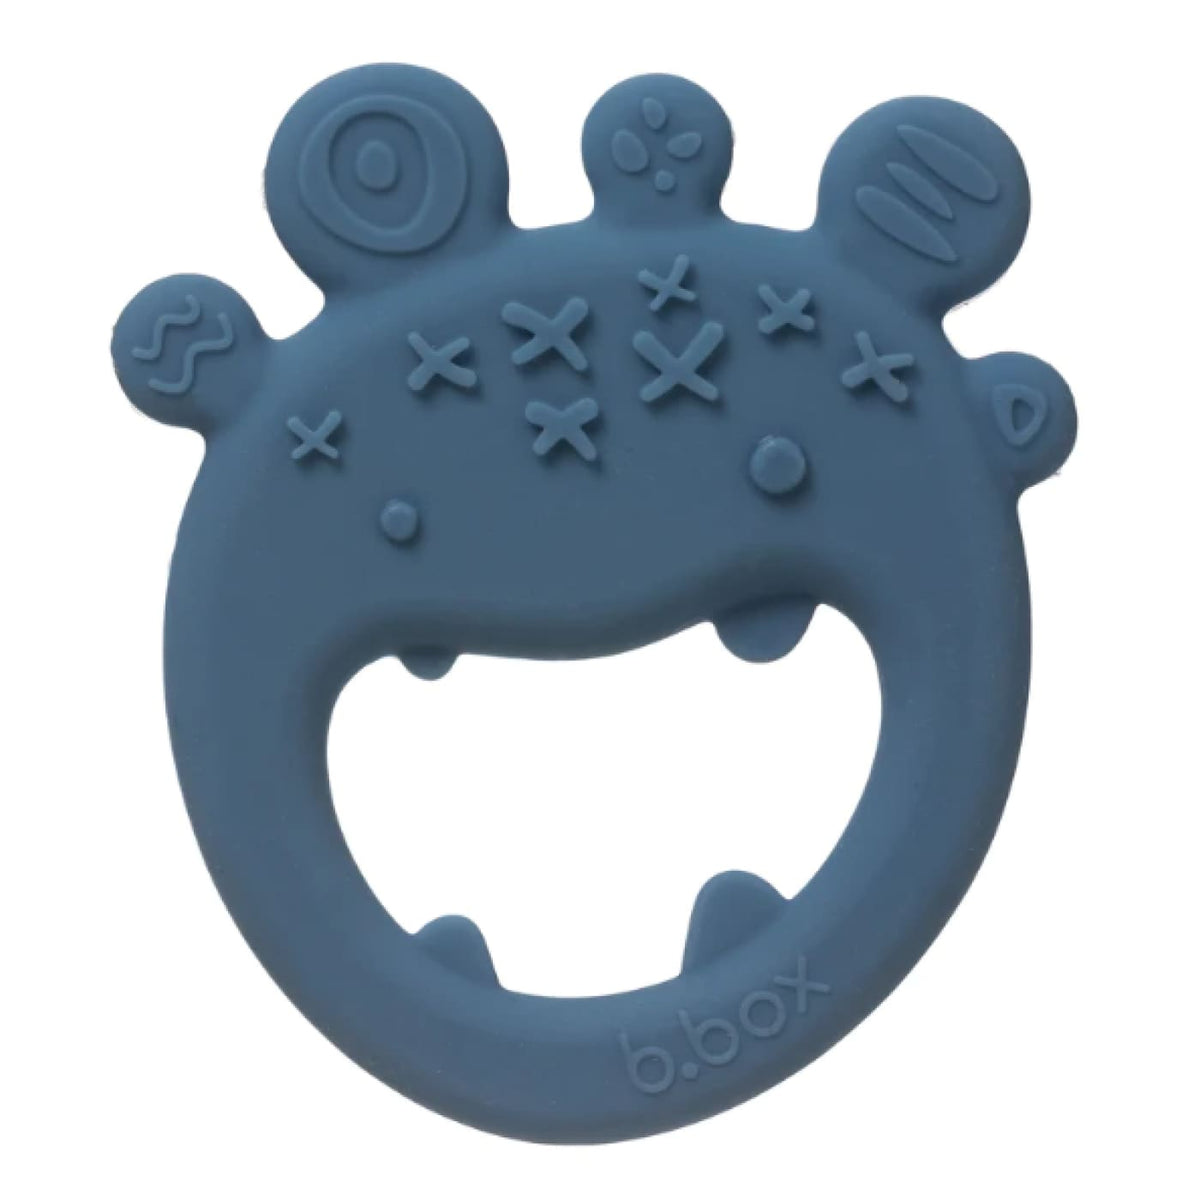 b.box Trio Teether - Lullaby Blue Monsters - Lullaby Blue Monsters - NURSING &amp; FEEDING - TEETHERS/TEETHING JEWELLERY